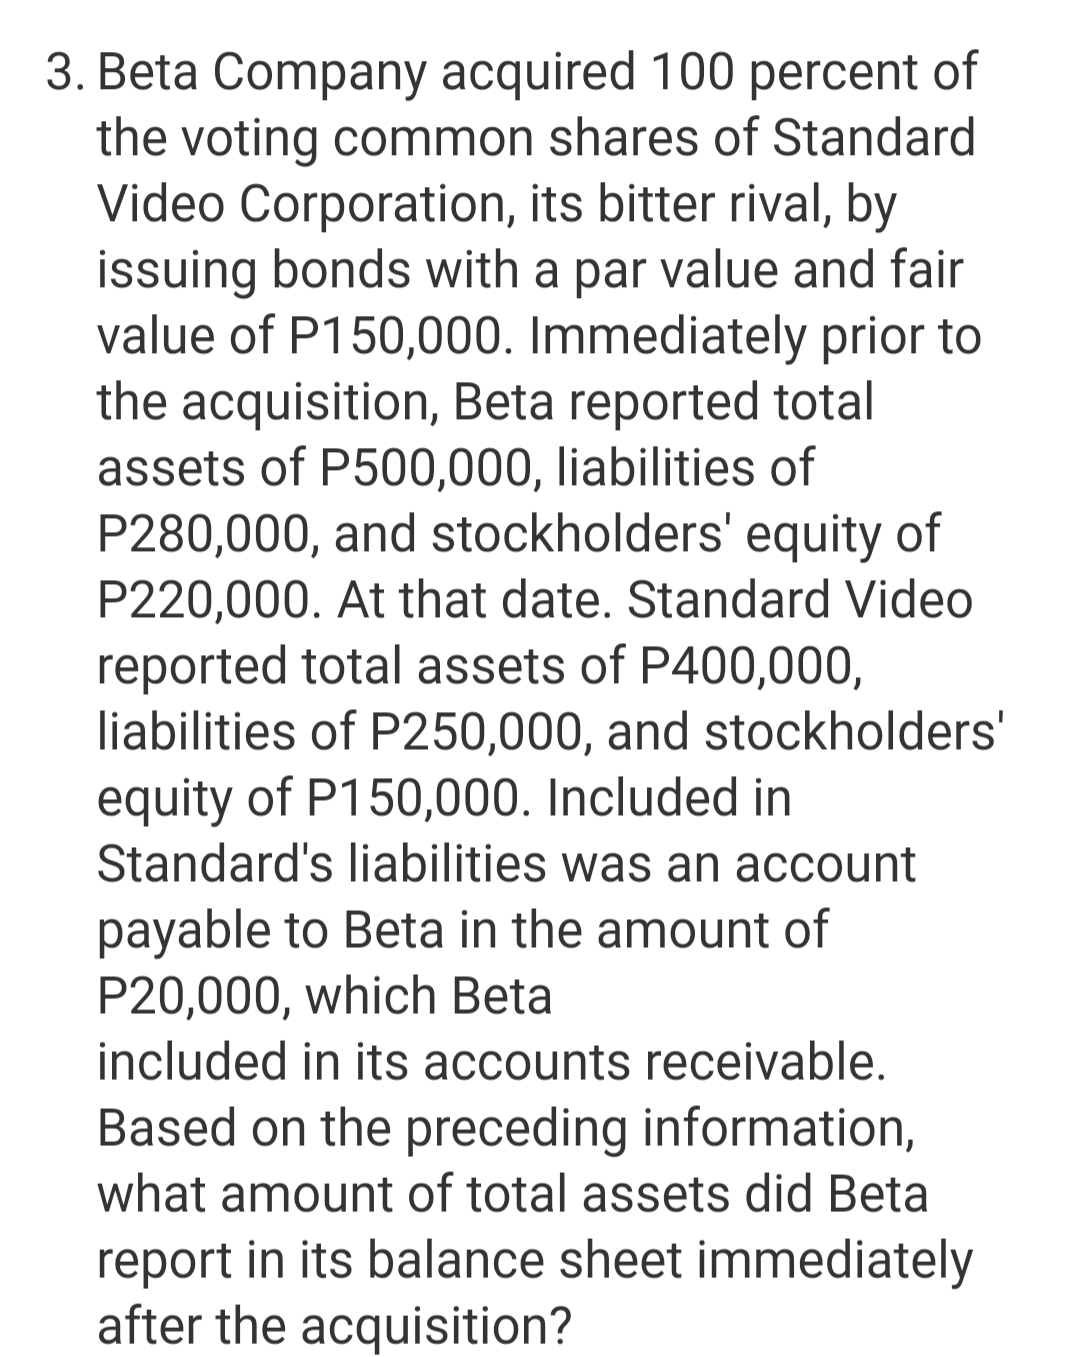 3. Beta Company acquired 100 percent of
the voting common shares of Standard
Video Corporation, its bitter rival, by
issuing bonds with a par value and fair
value of P150,000. Immediately prior to
the acquisition, Beta reported total
assets of P500,000, liabilities of
P280,000, and stockholders' equity of
P220,000. At that date. Standard Video
reported total assets of P400,000,
liabilities of P250,000, and stockholders'
equity of P150,000. Included in
Standard's liabilities was an account
payable to Beta in the amount of
P20,000, which Beta
included in its accounts receivable.
Based on the preceding information,
what amount of total assets did Beta
report in its balance sheet immediately
after the acquisition?
